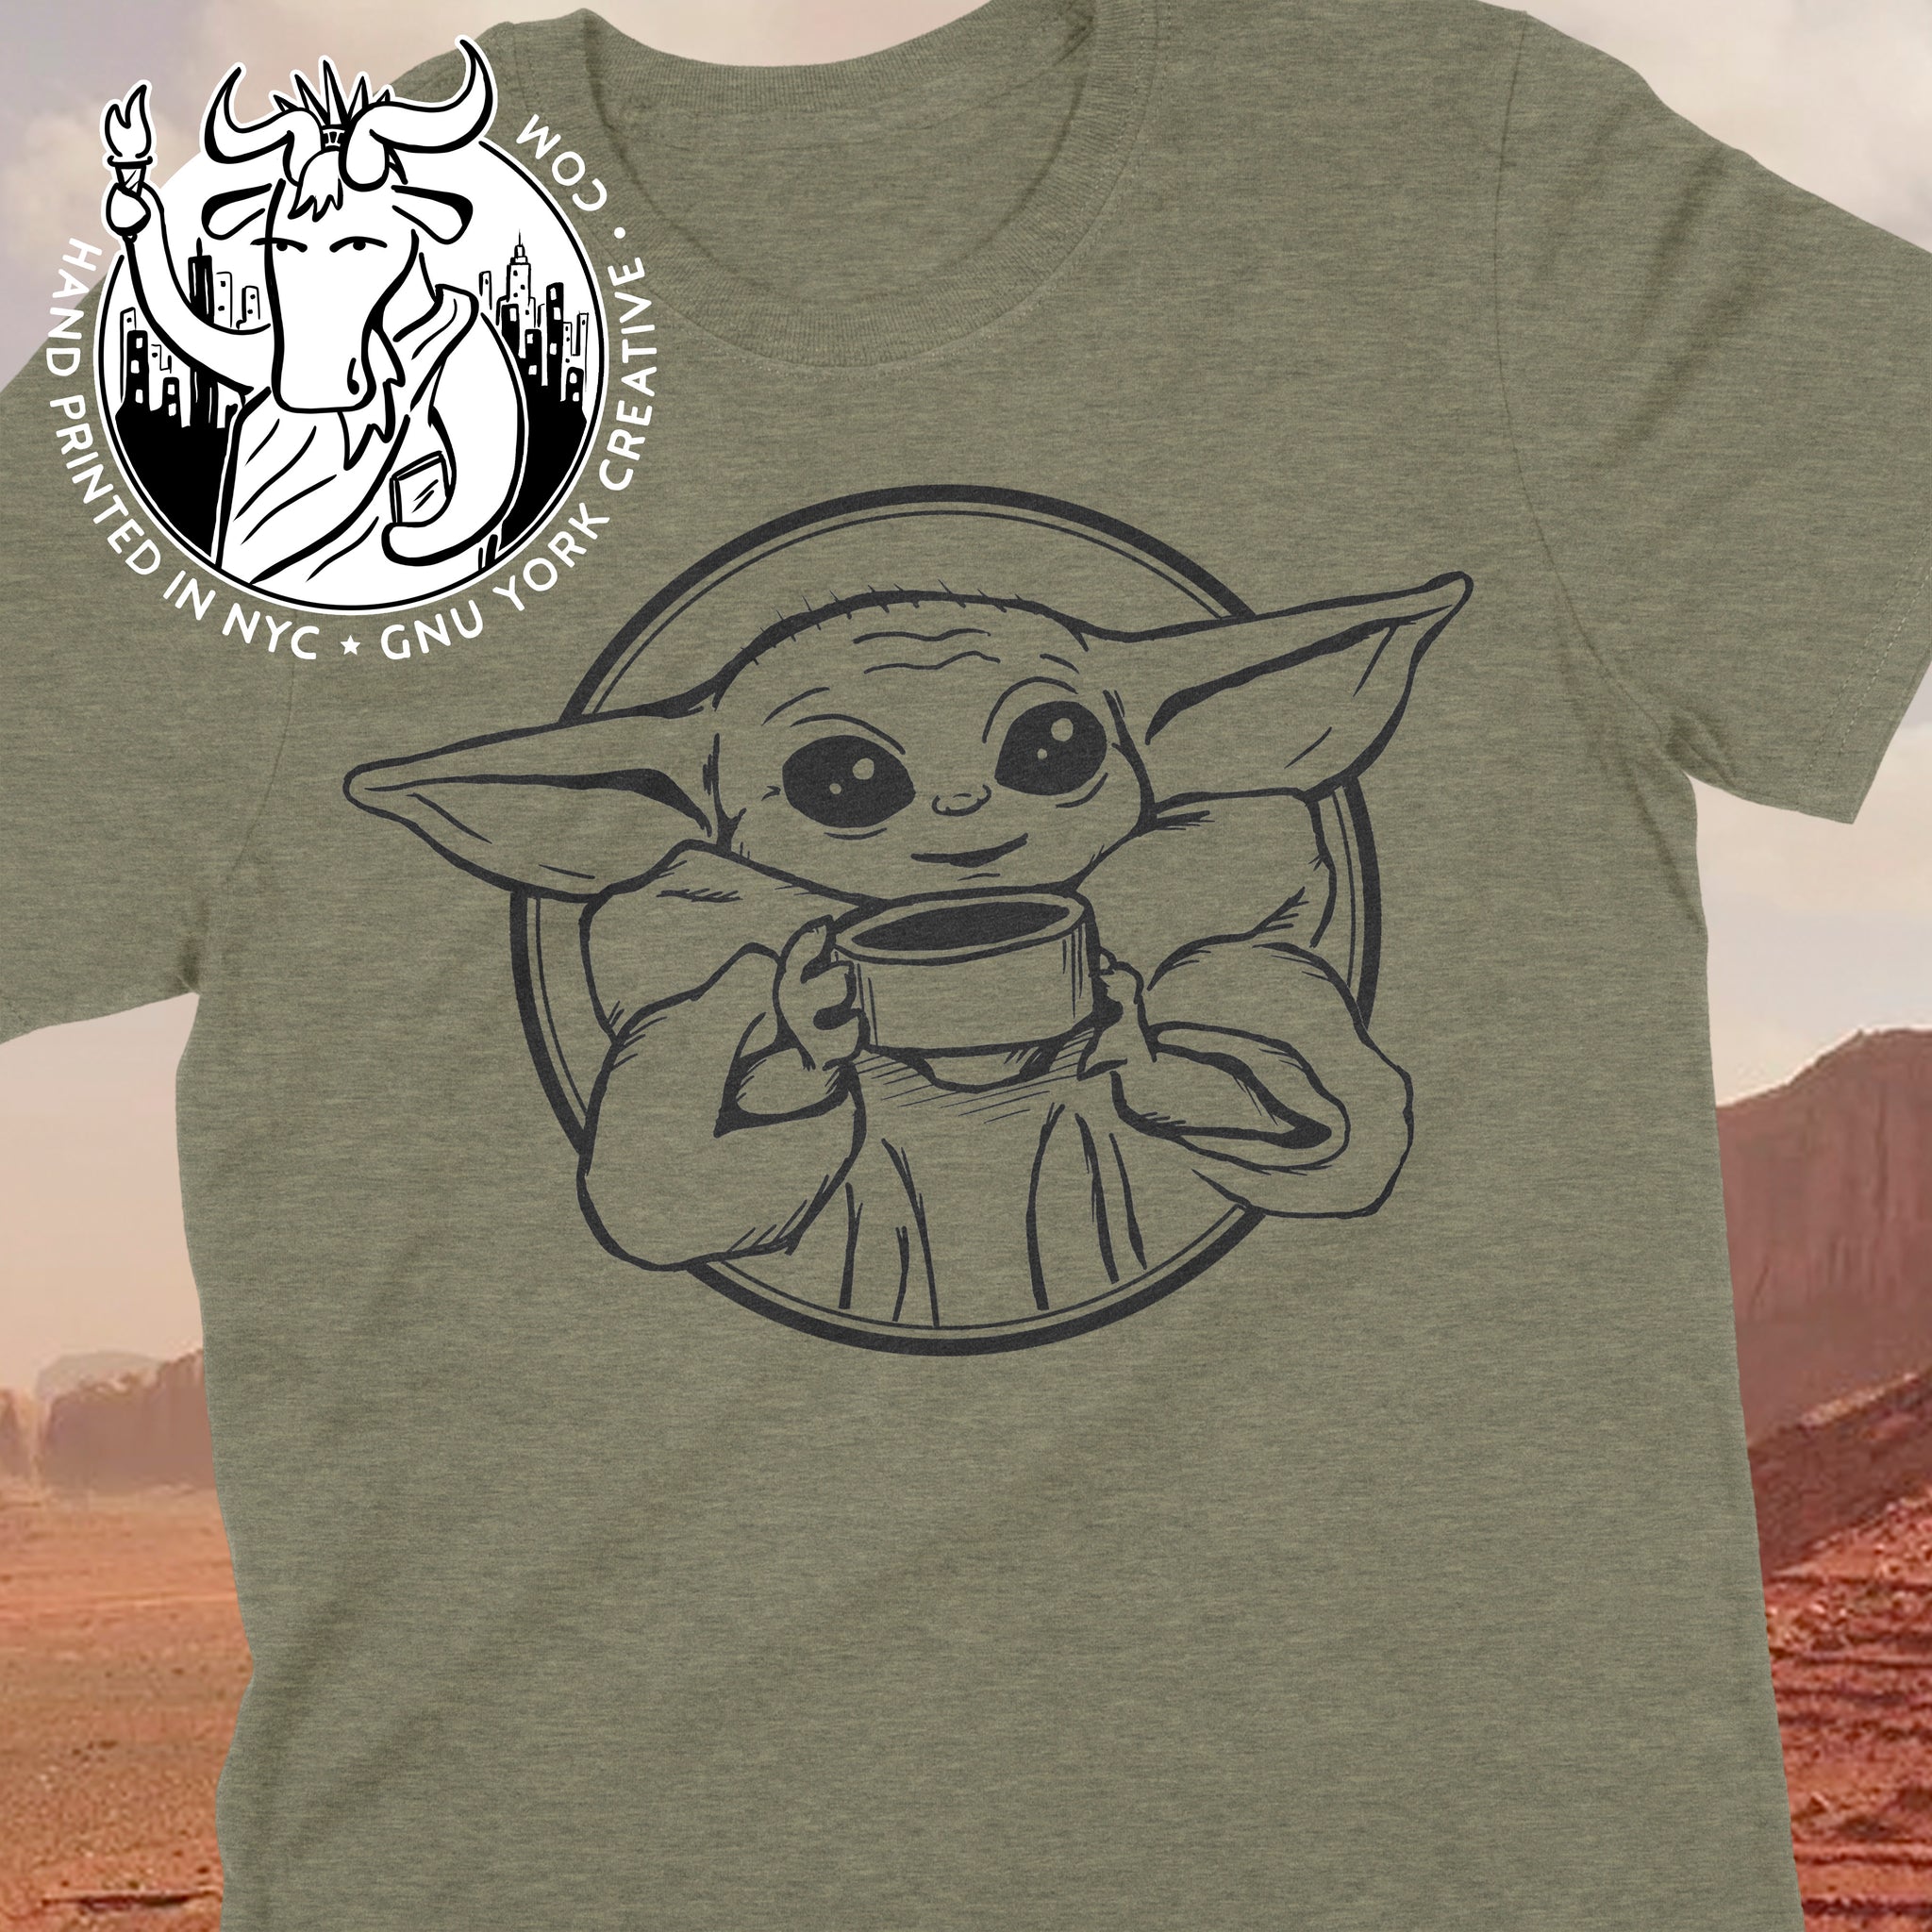 The Cutest Child in the Galaxy (Baby Yoda drawing) – Handprint NYC /  GnuYorker.com